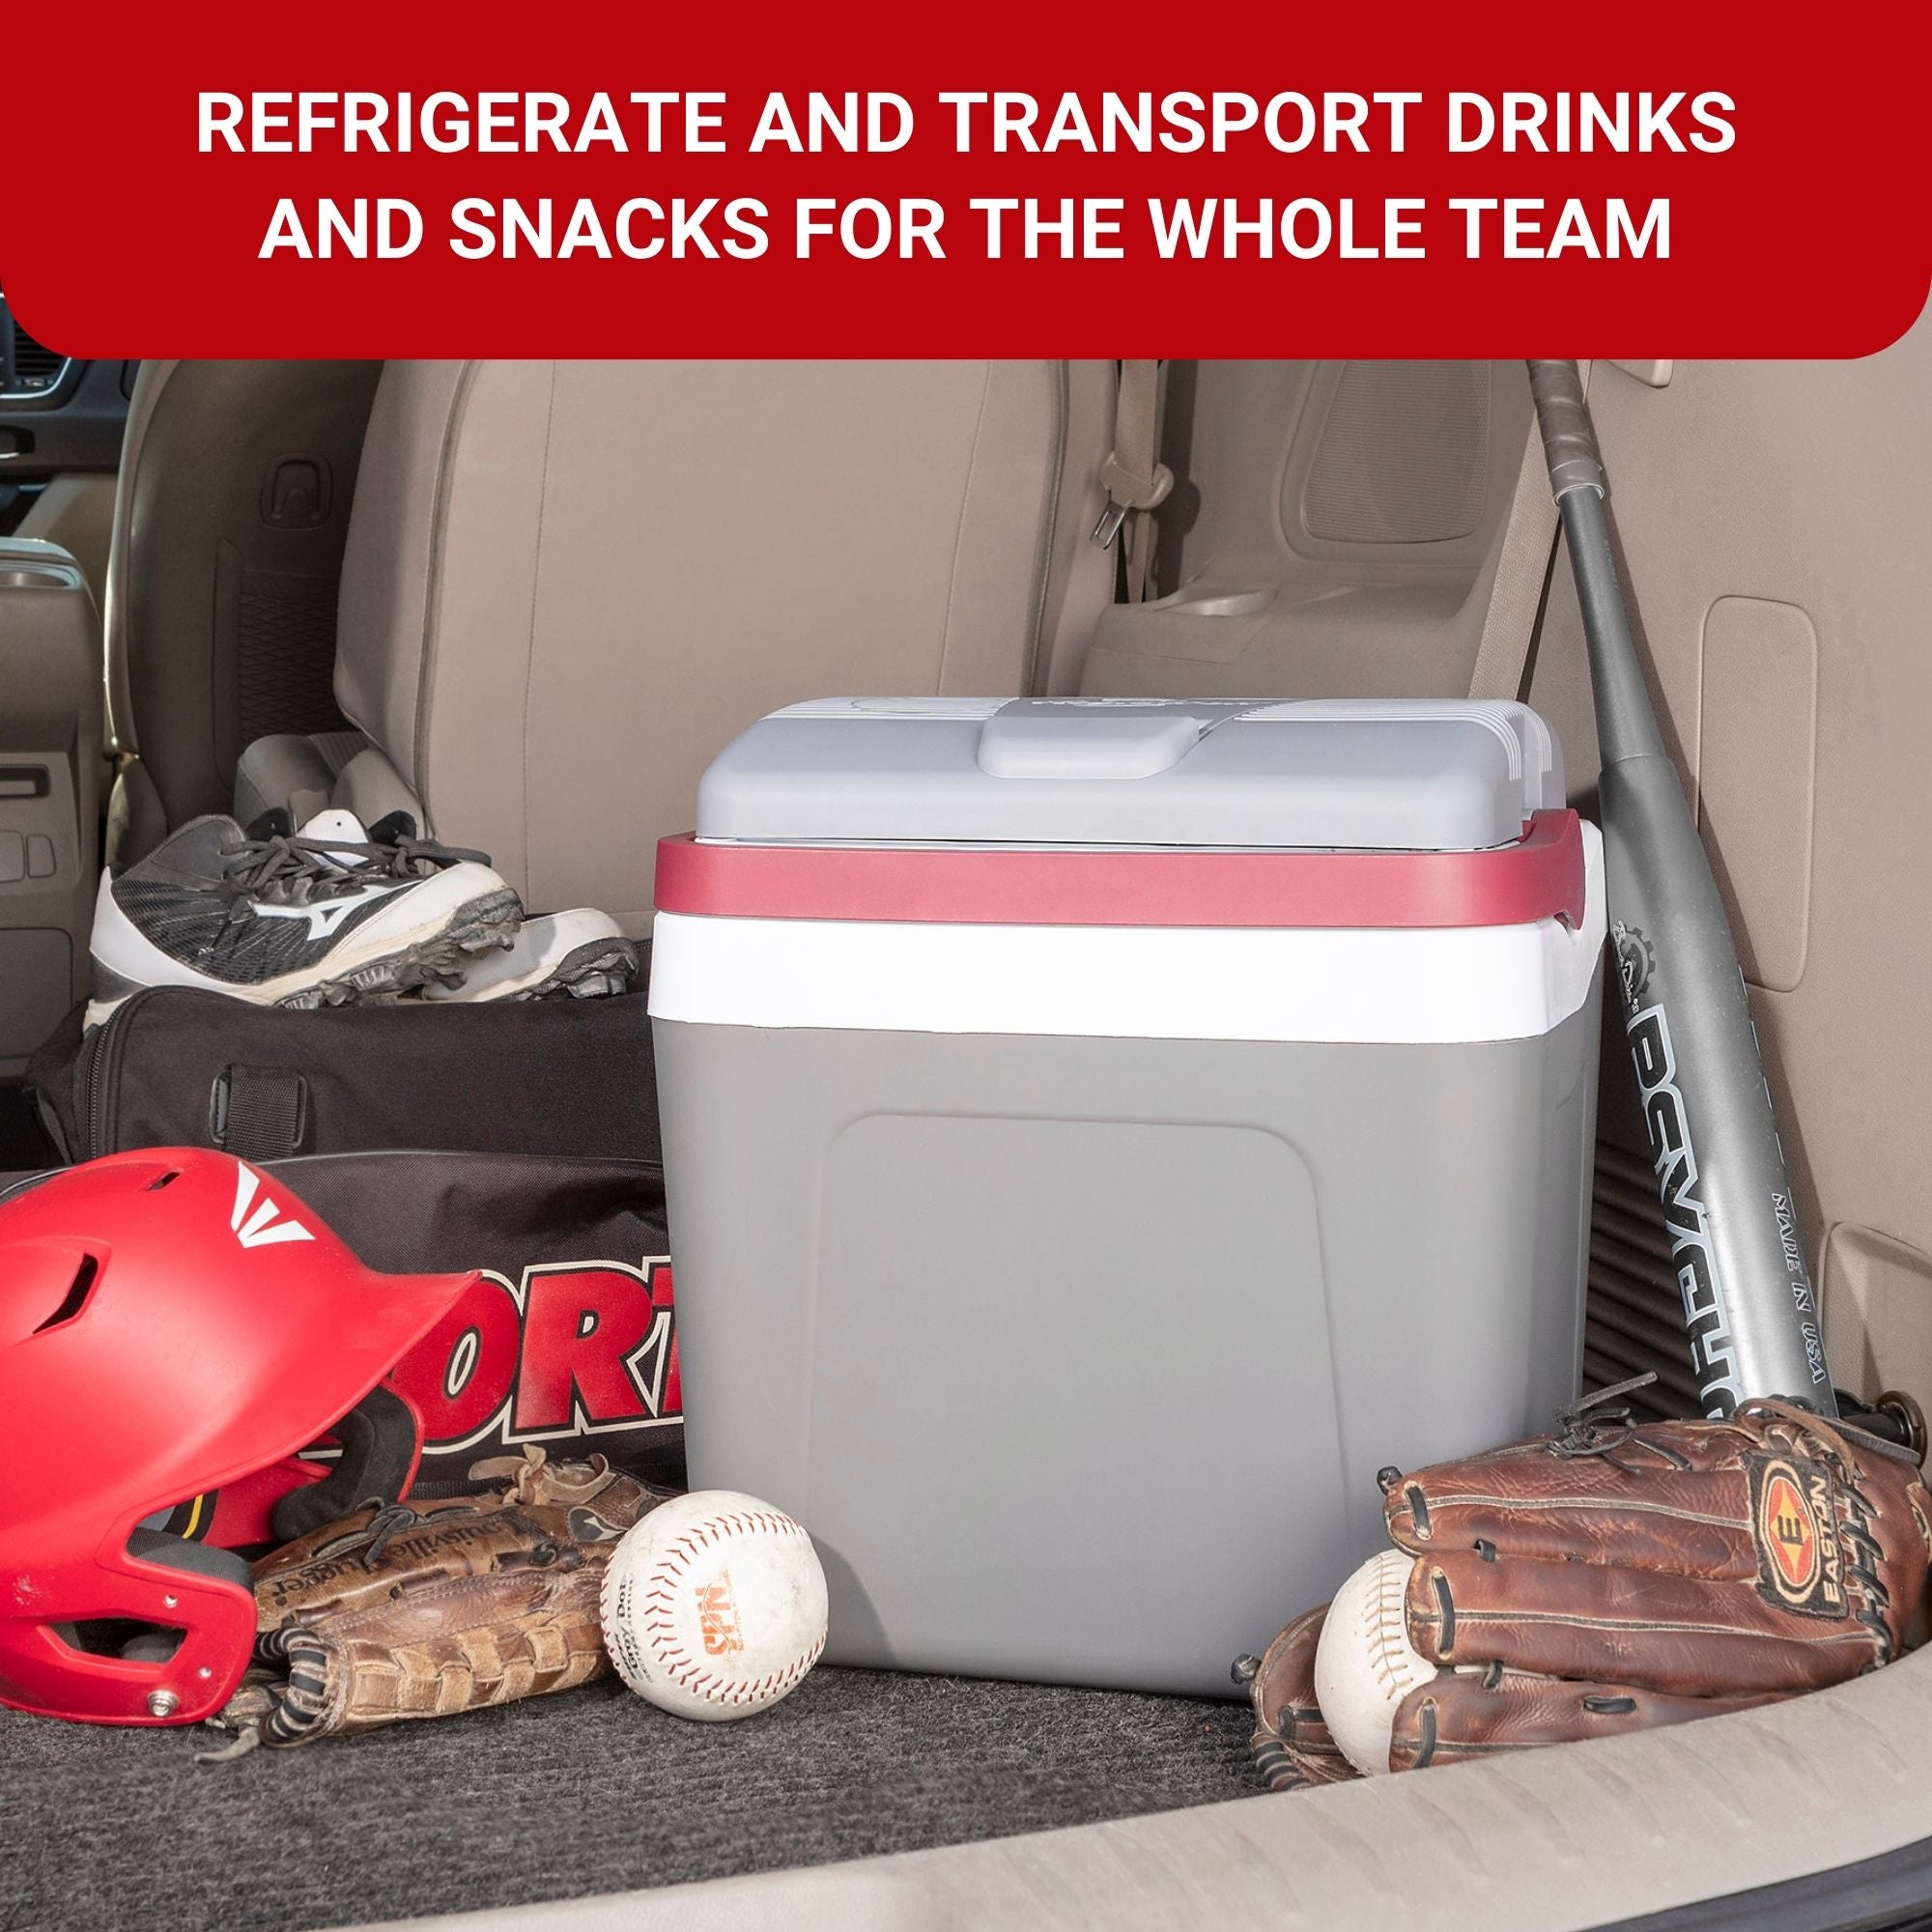 Koolatron portable 12V cooler, closed, in the back of a van, surrounded by baseball equipment. Text above reads, "REFRIGERATE AND TRANSPORT DRINKS AND SNACKS FOR THE WHOLE TEAM"